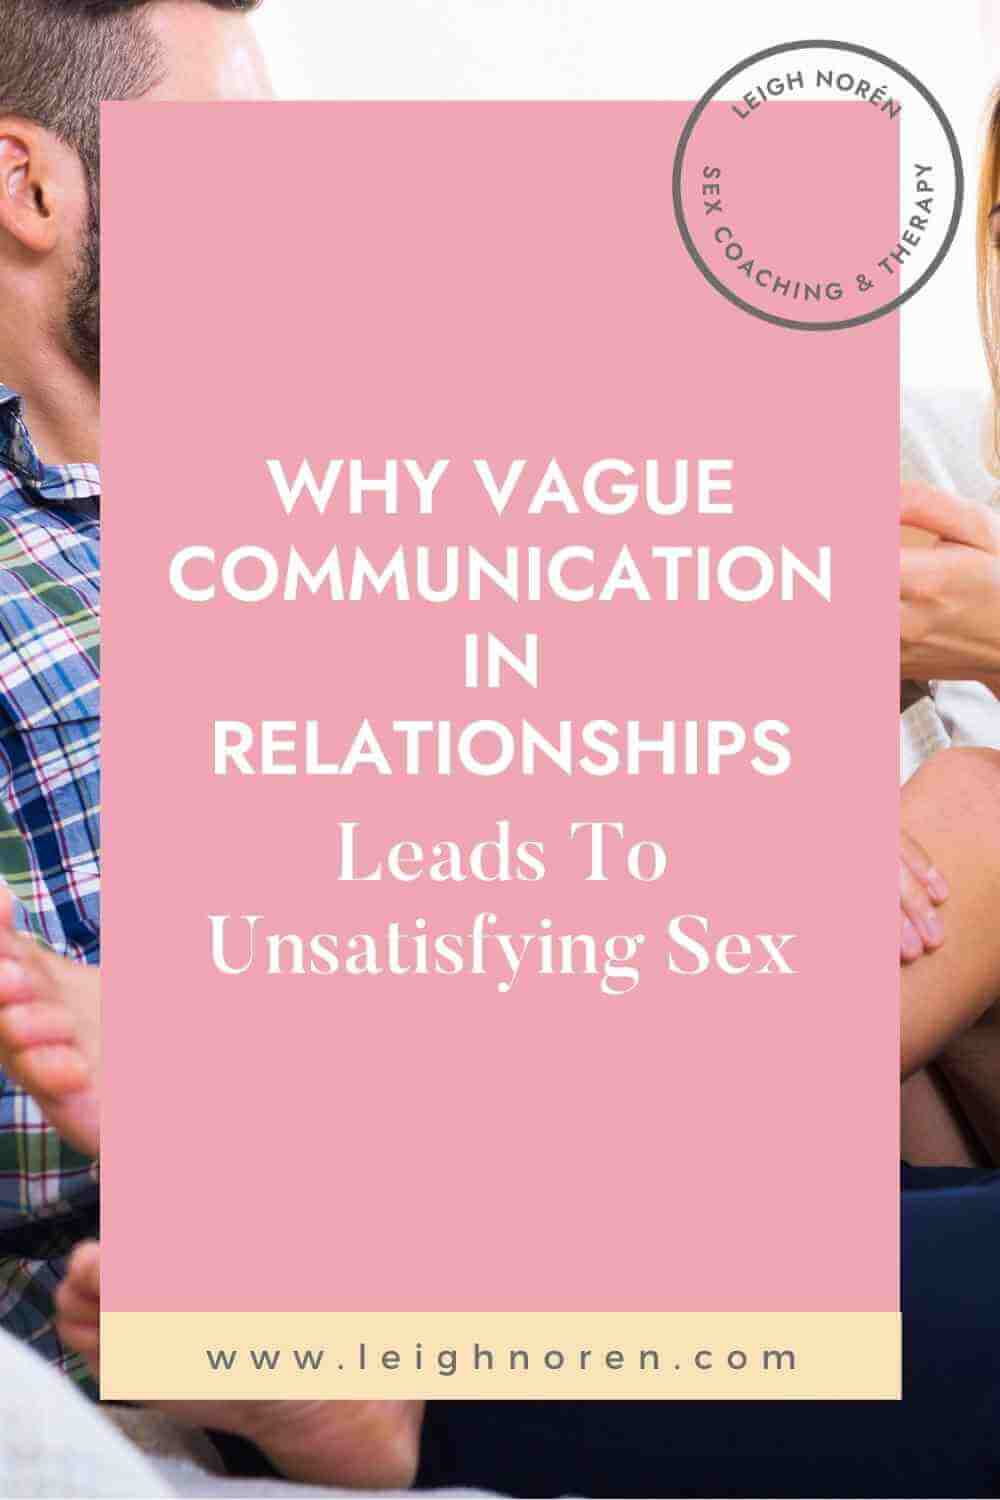 Why Vague Communication in Relationships Leads to Unsatisfying Sex